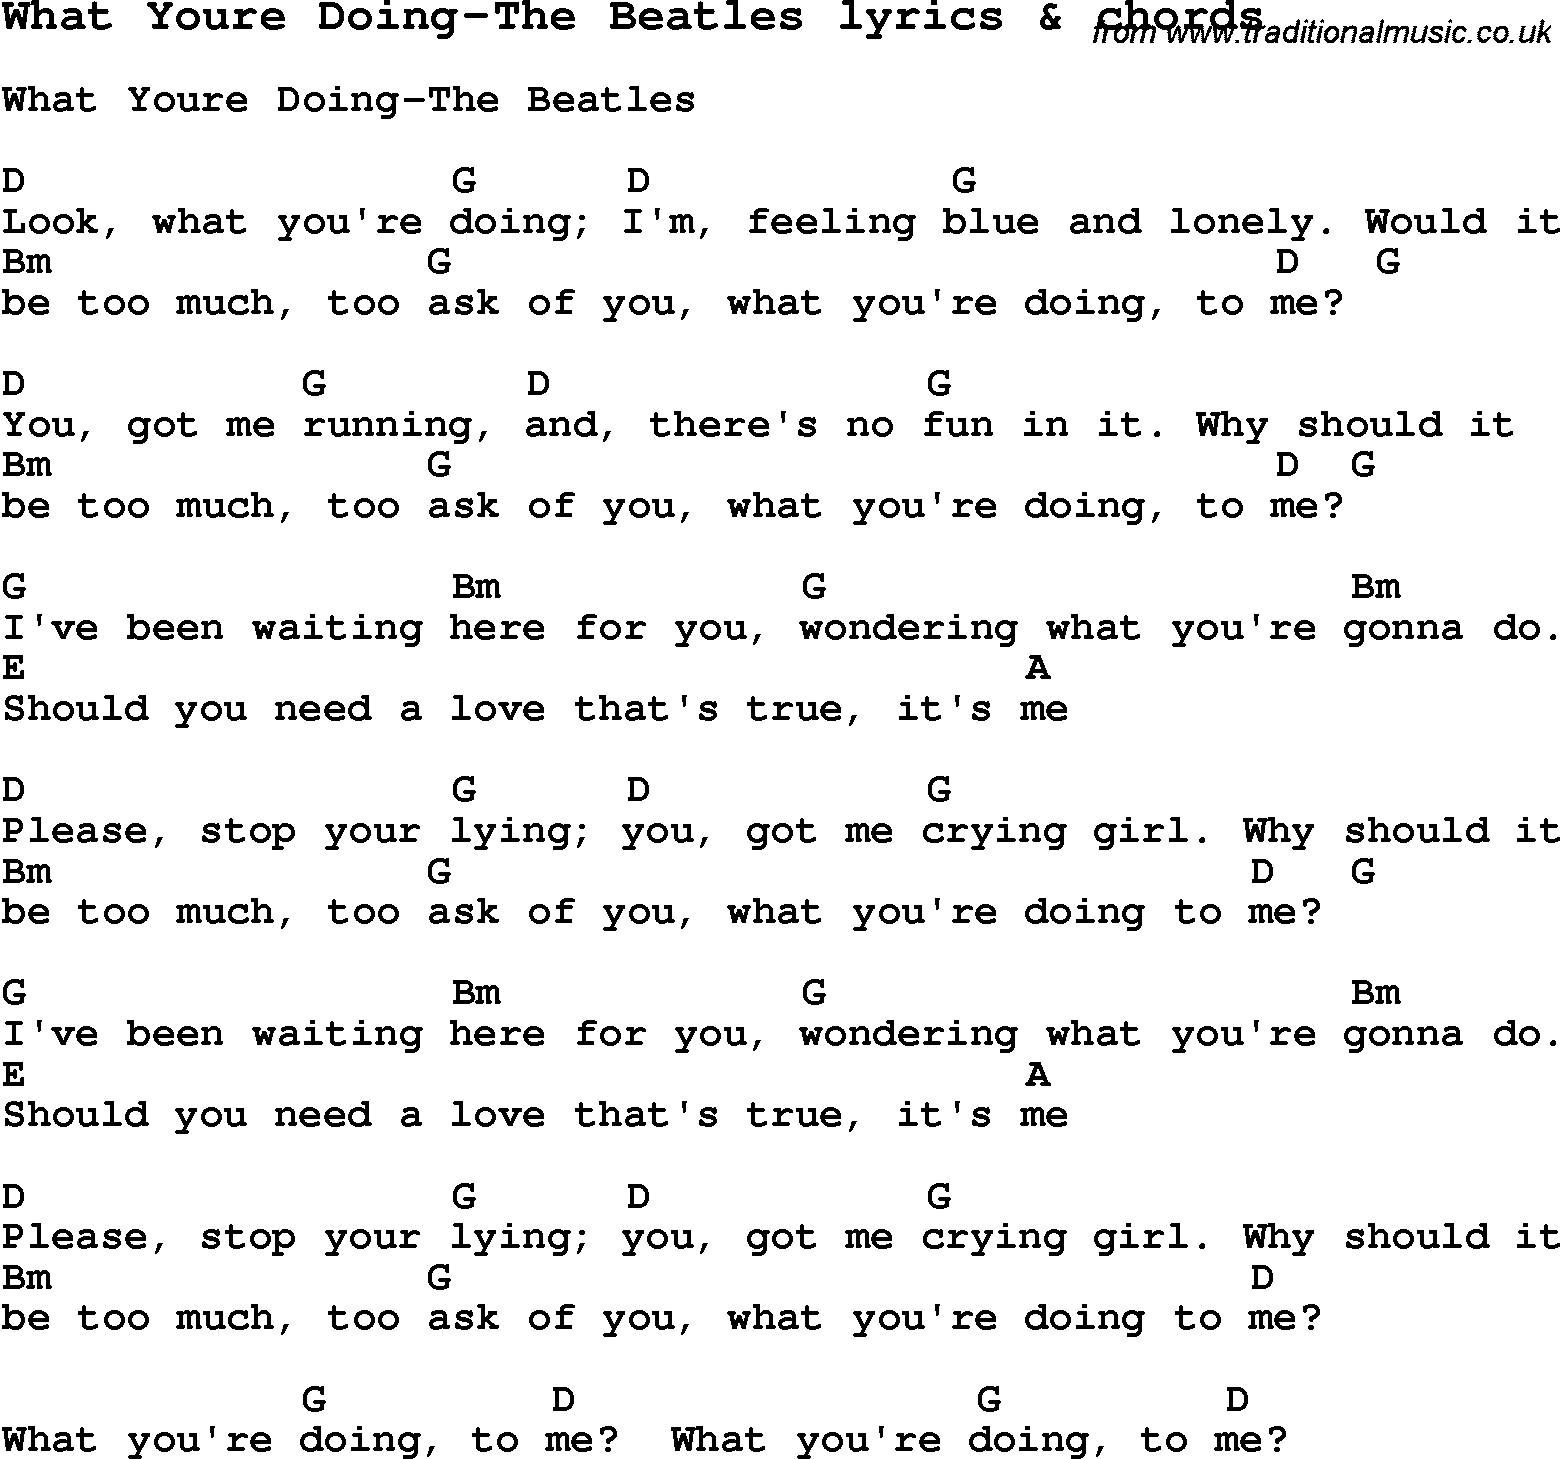 Love Song Lyrics for: What Youre Doing-The Beatles with chords for Ukulele, Guitar Banjo etc.